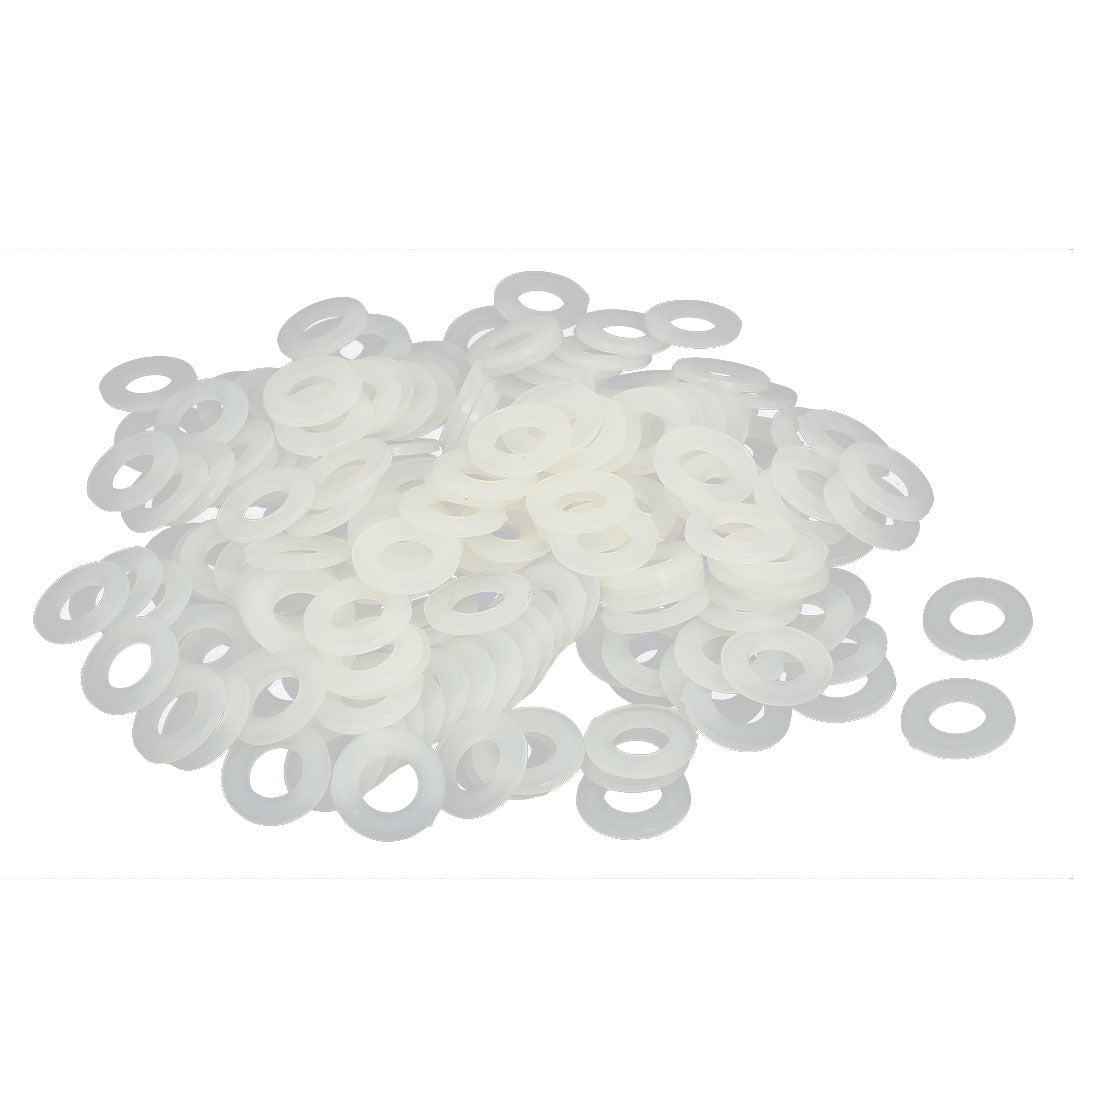 Uxcell Uxcell M6 x 12mm x 1.2mm Nylon Flat Insulating Washers Gaskets Spacers Fastener 200PCS